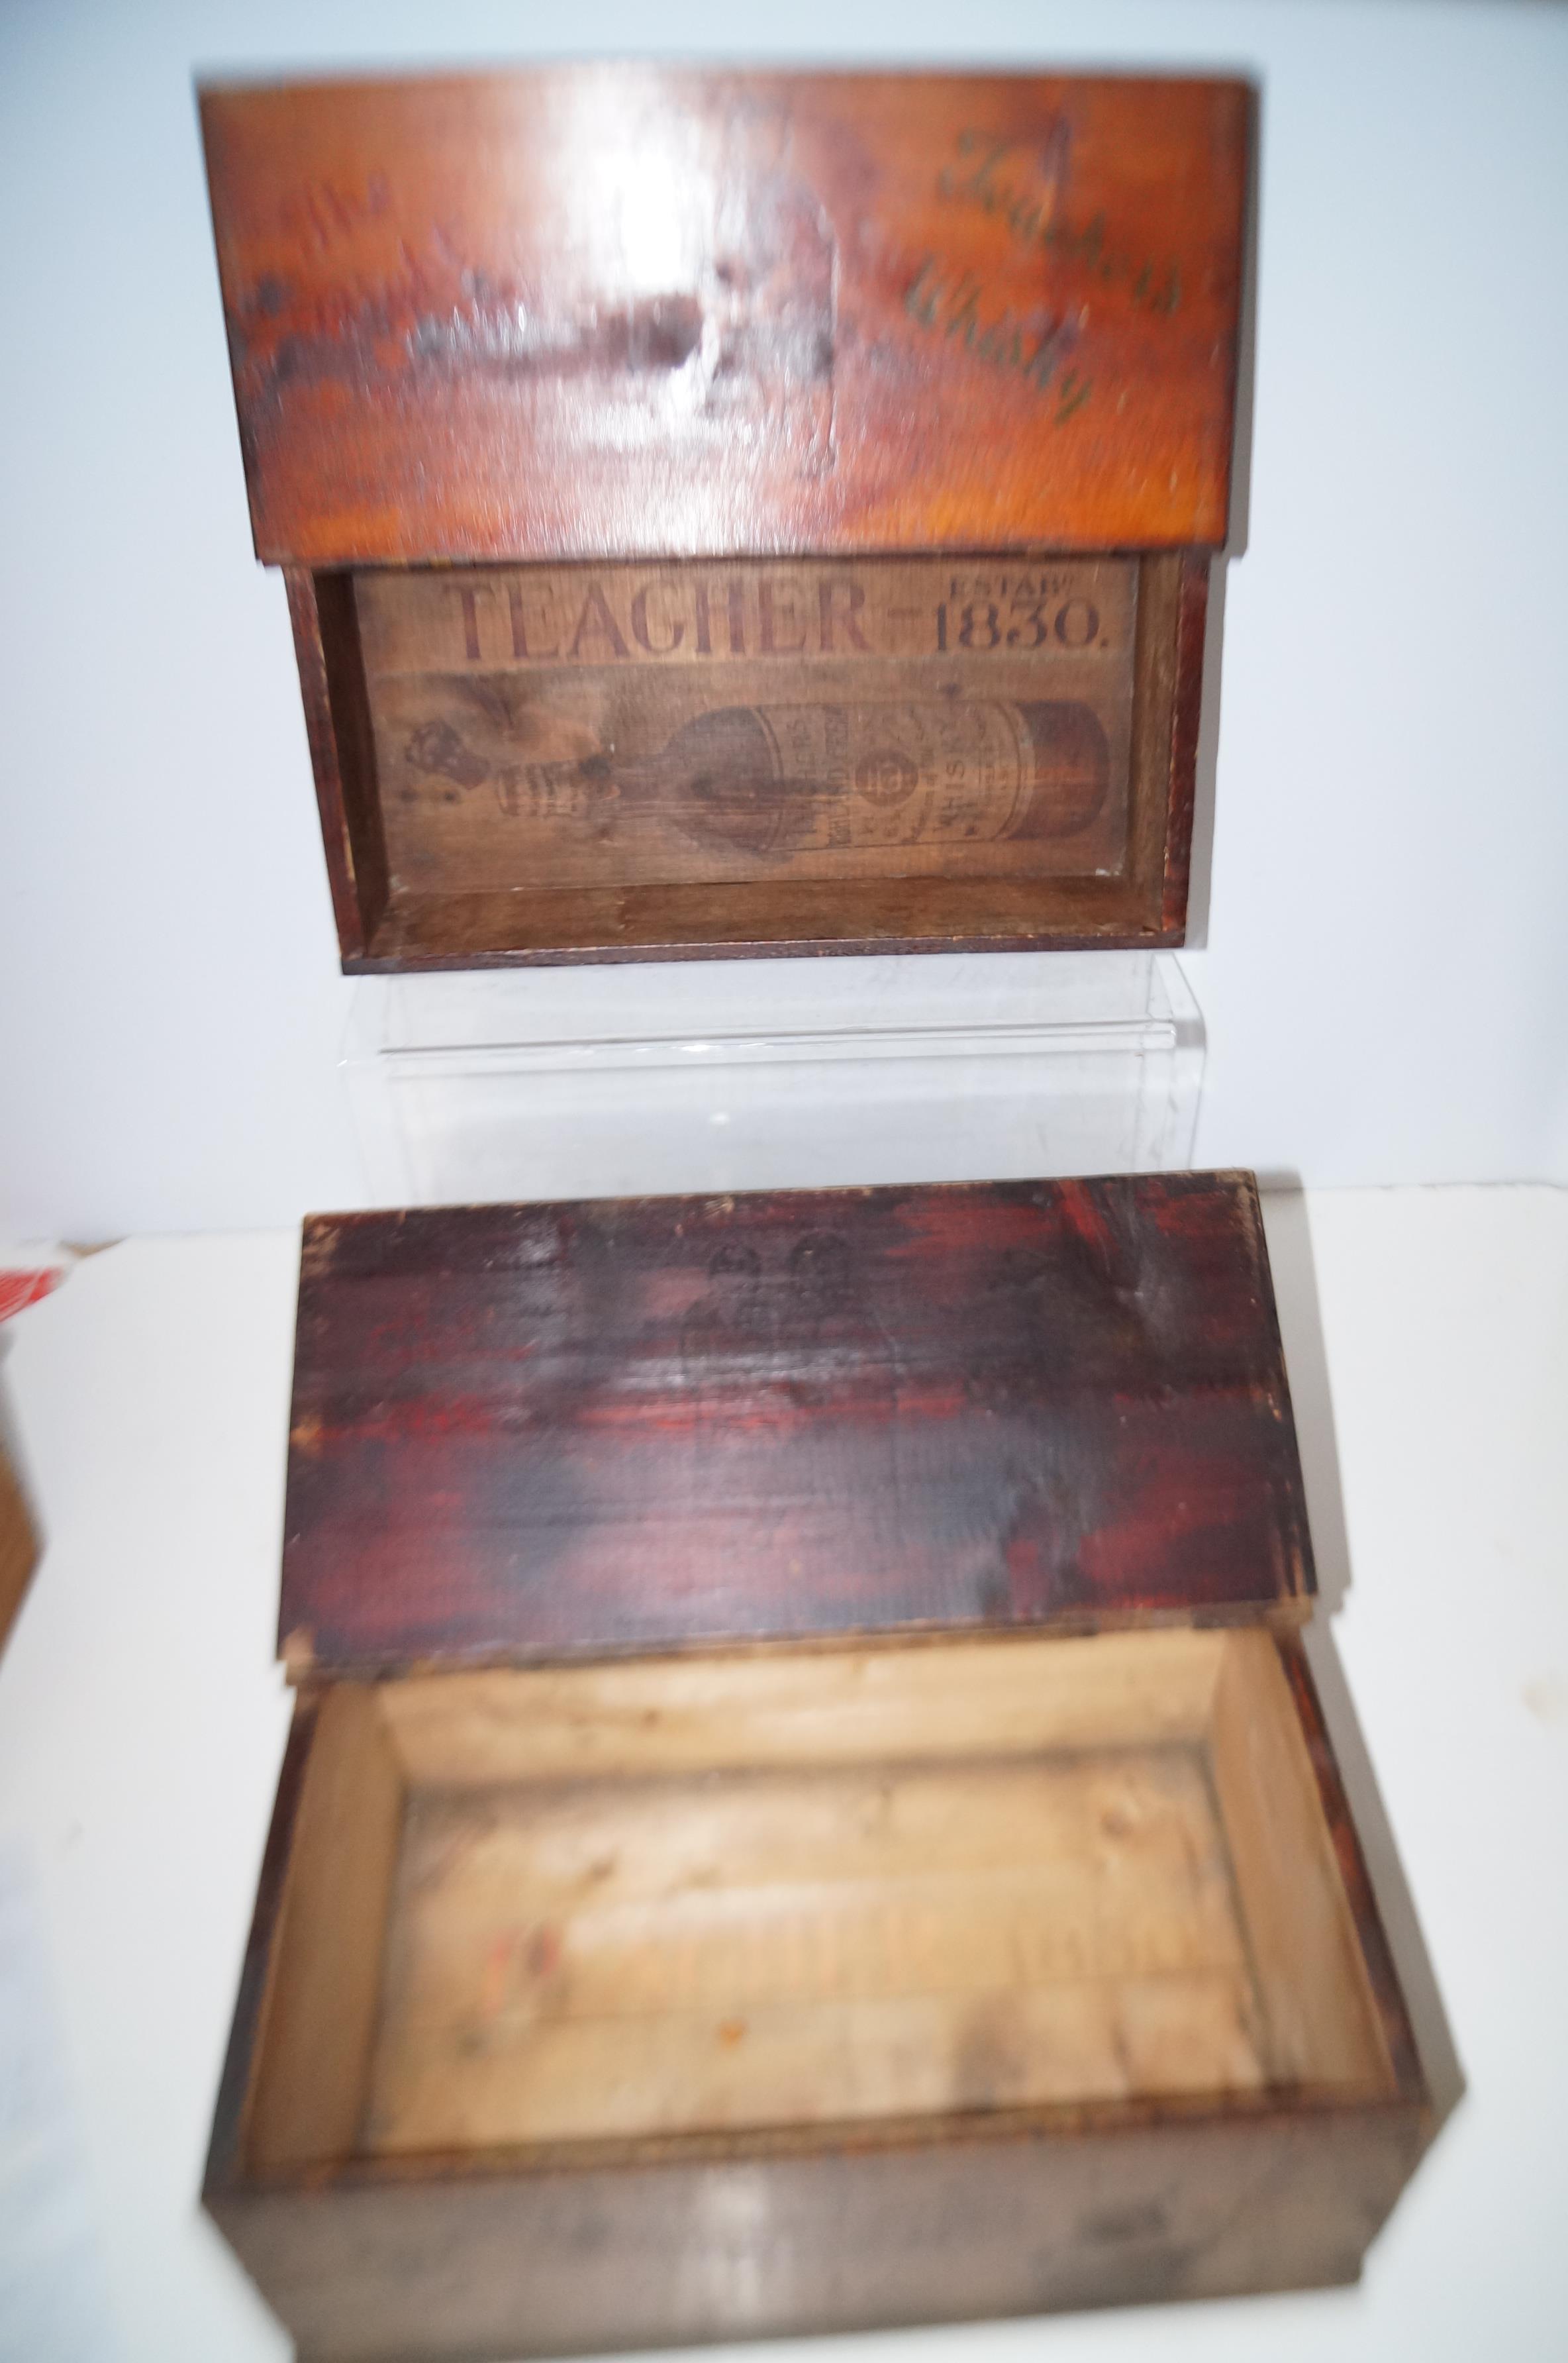 2 Vintage pine teachers whiskey boxes together wit